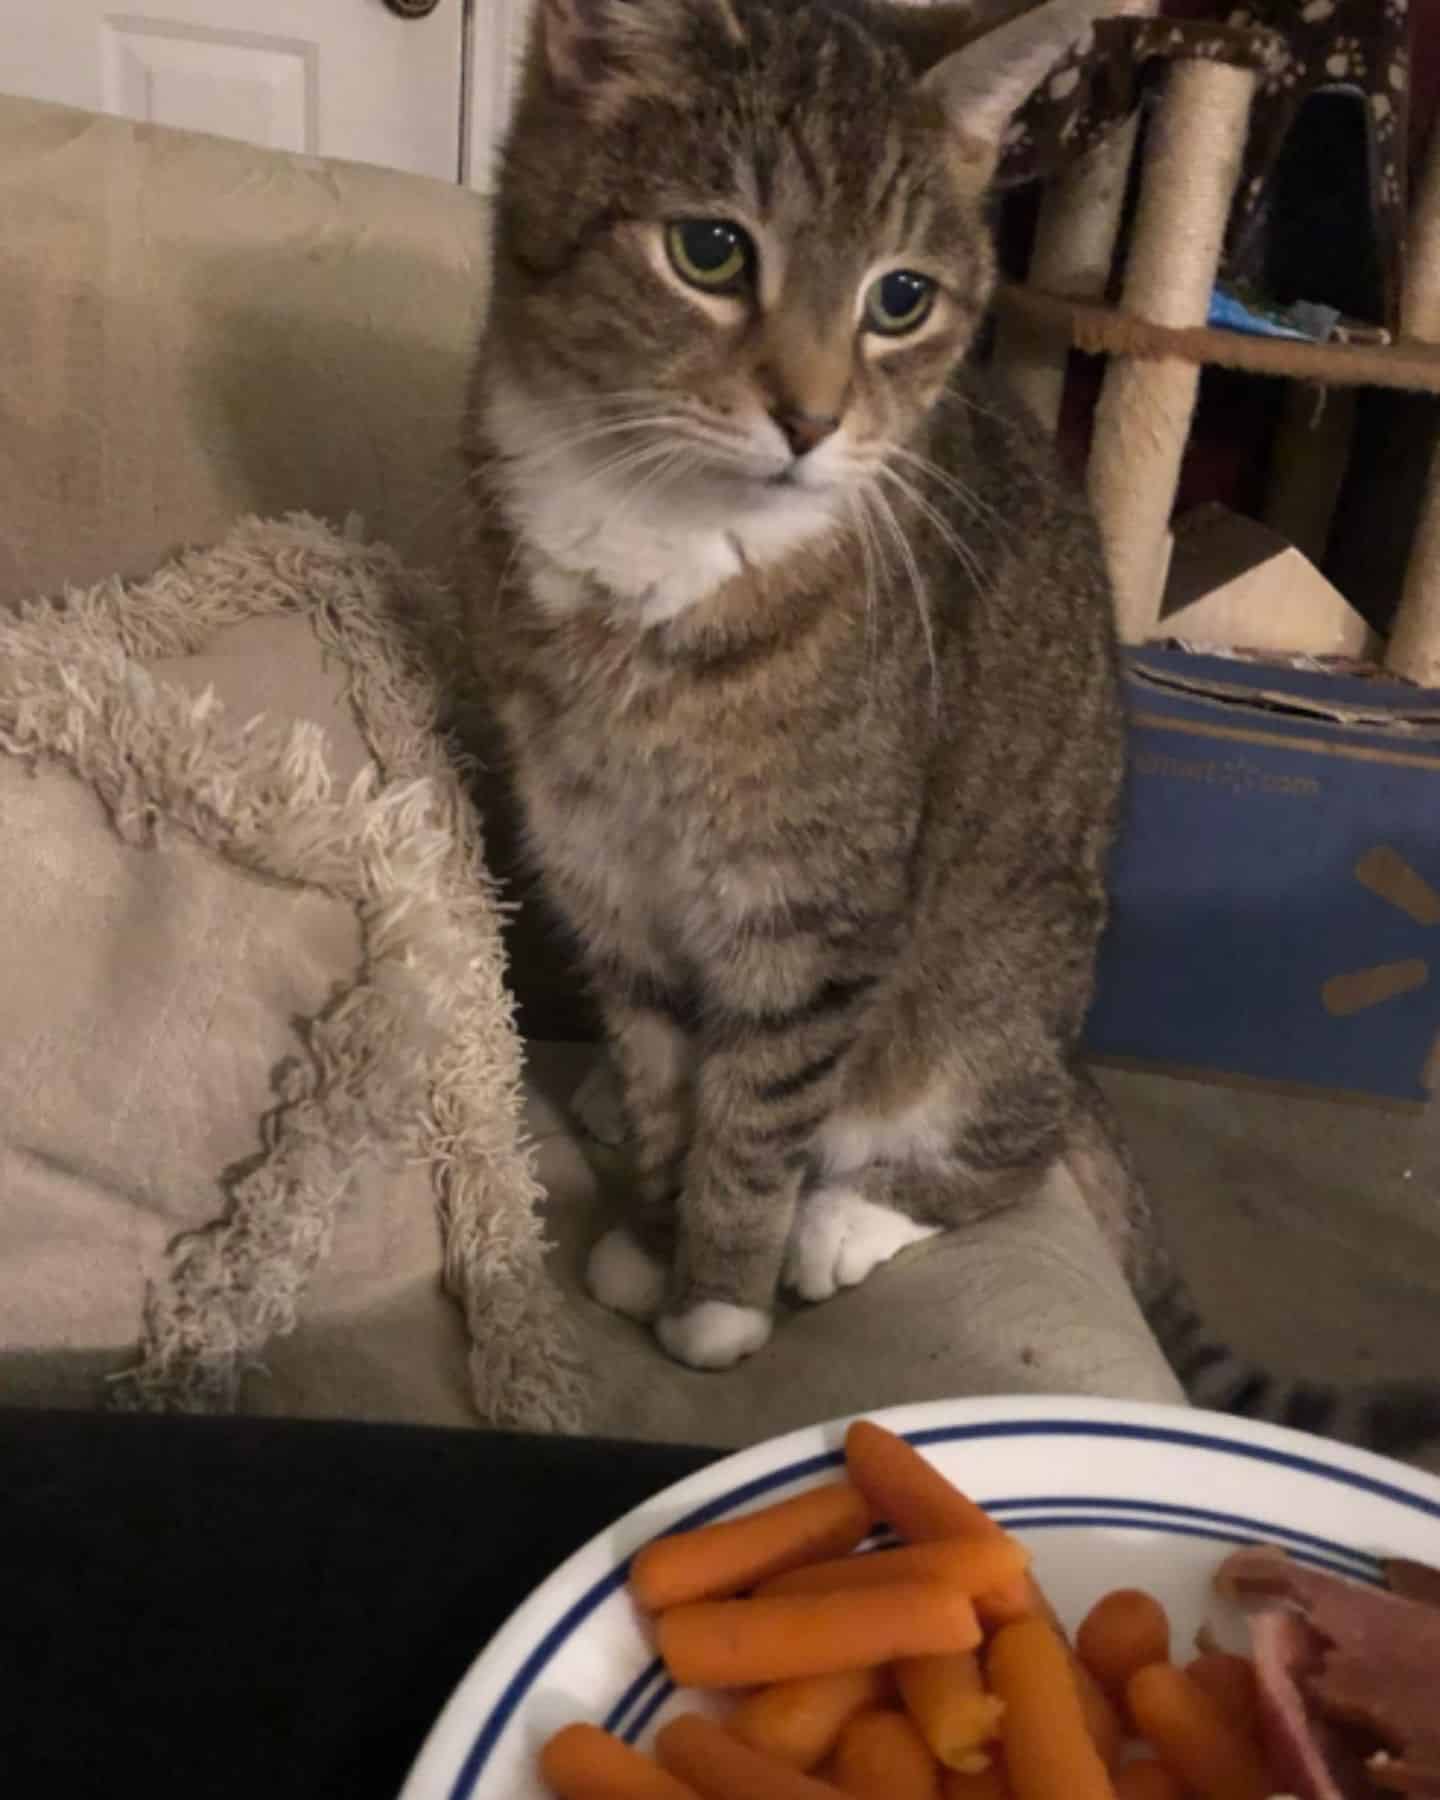 the cat is sitting on the bed next to a plate of hot dogs